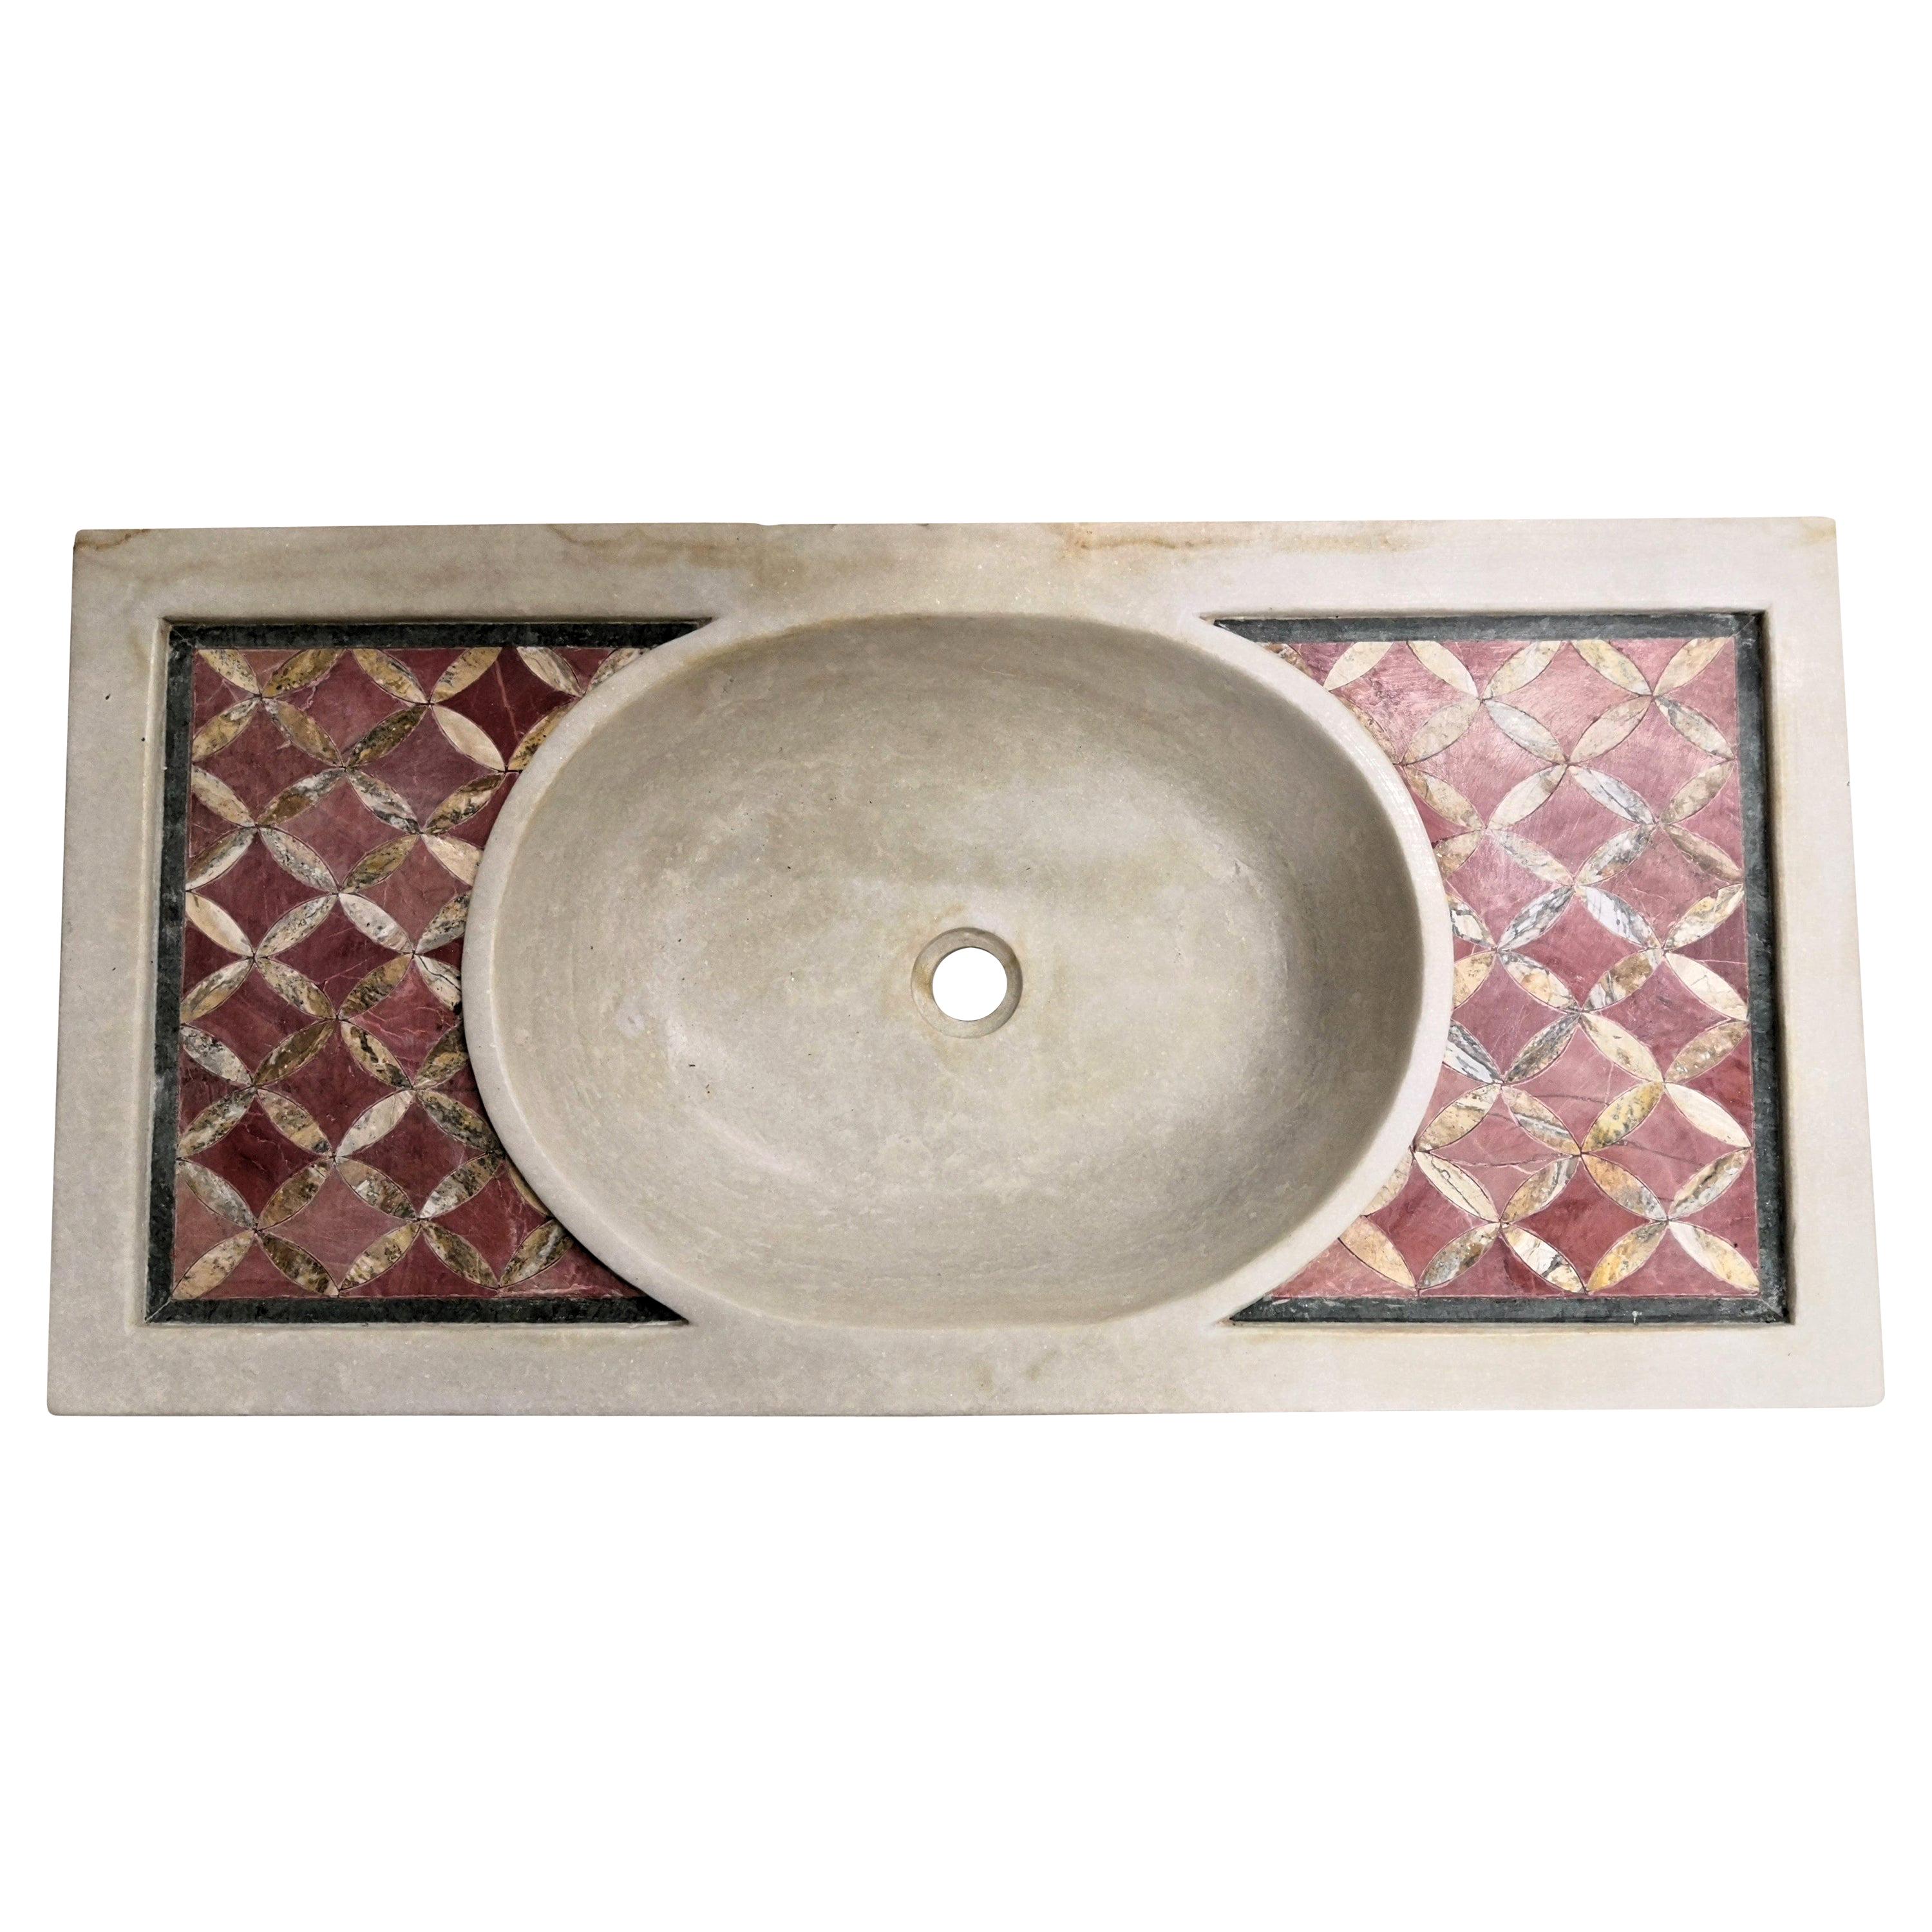 Classical Inlaid Carved Marble Stone Sink Basin For Sale